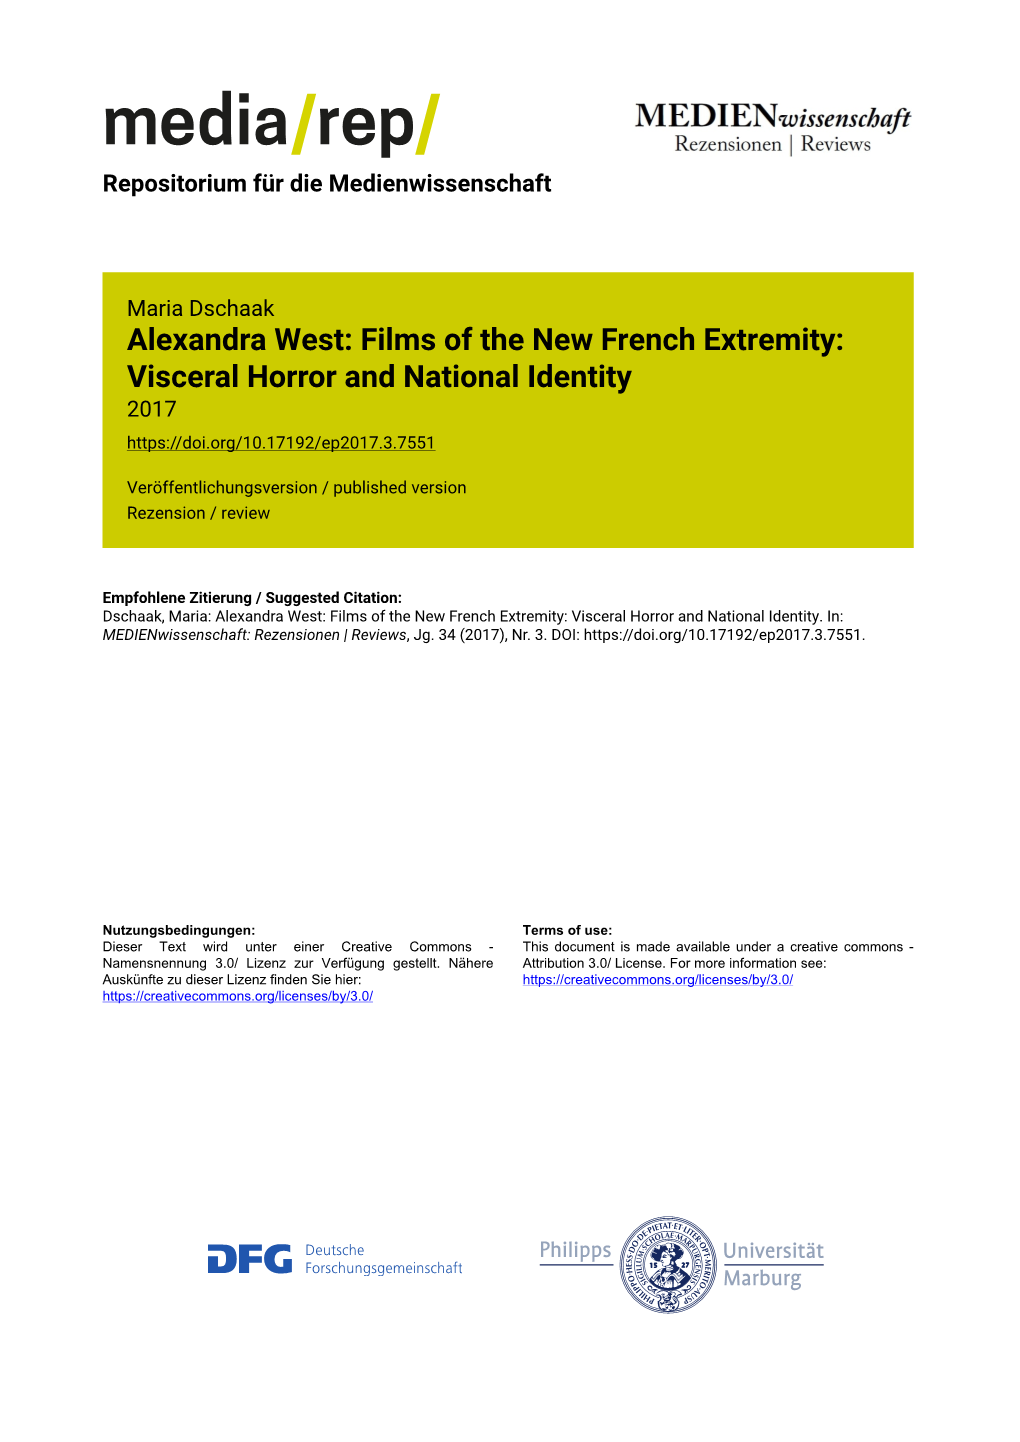 Films of the New French Extremity: Visceral Horror and National Identity 2017